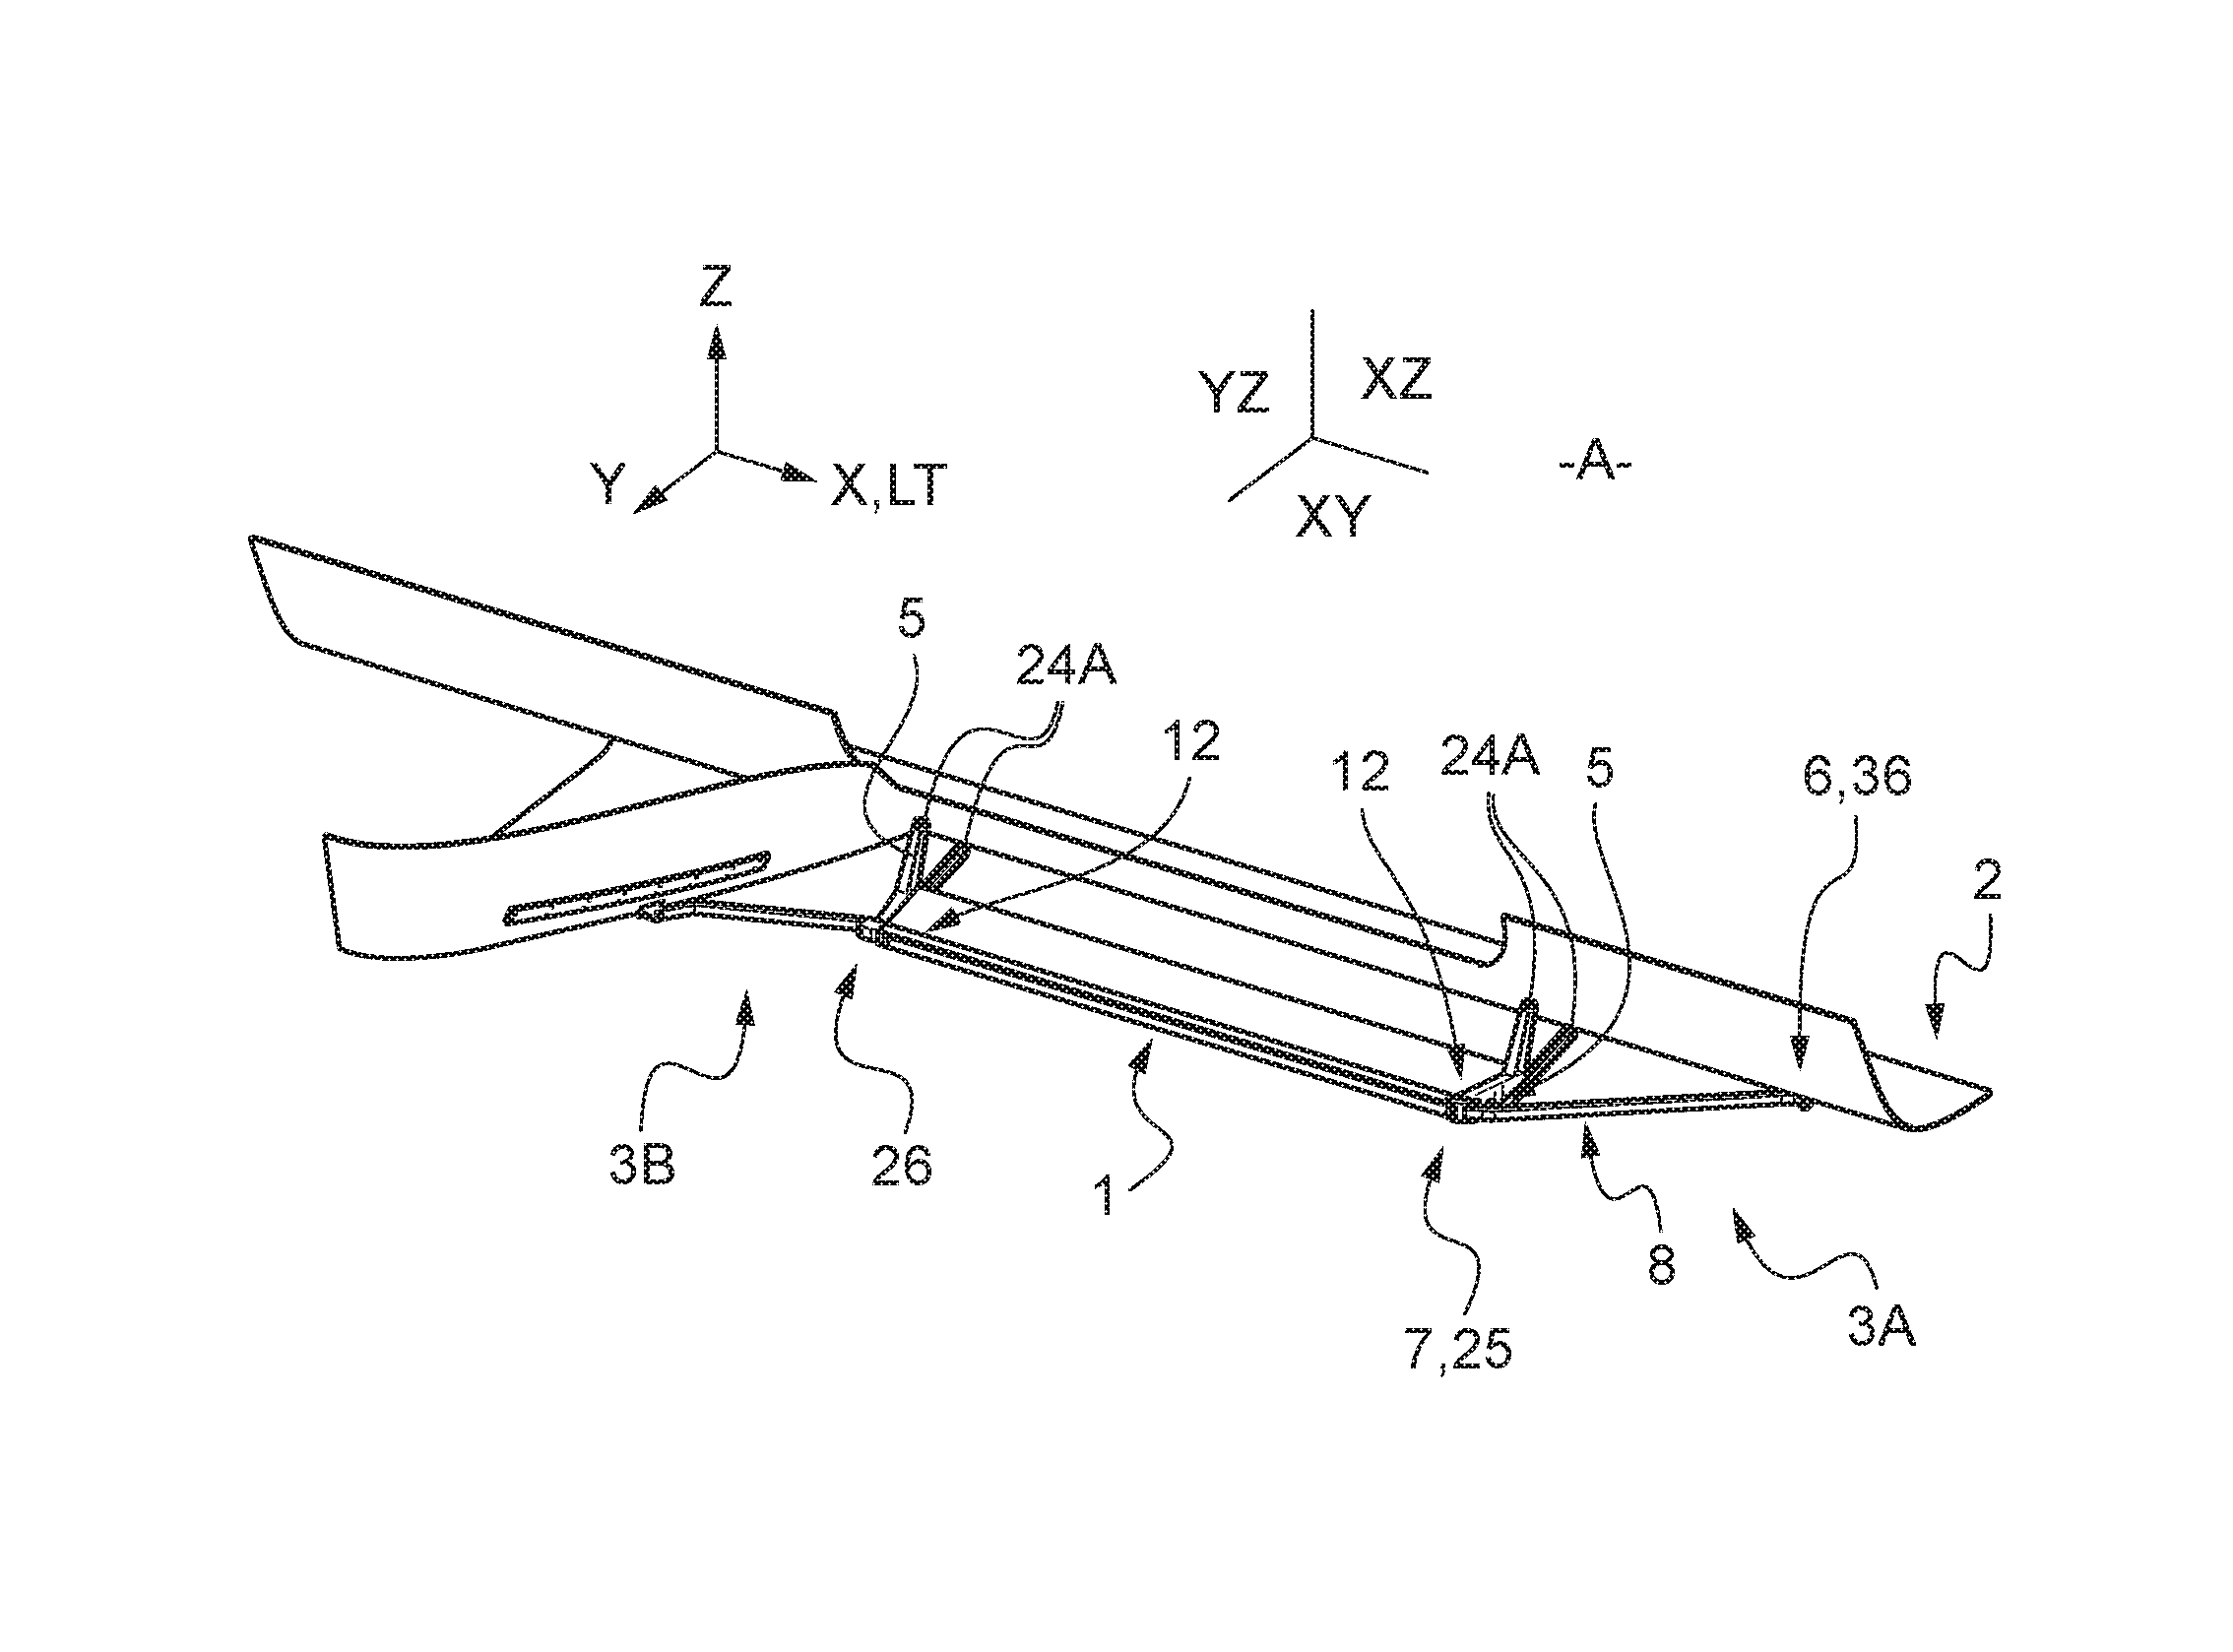 Deflector assembly for an aircraft